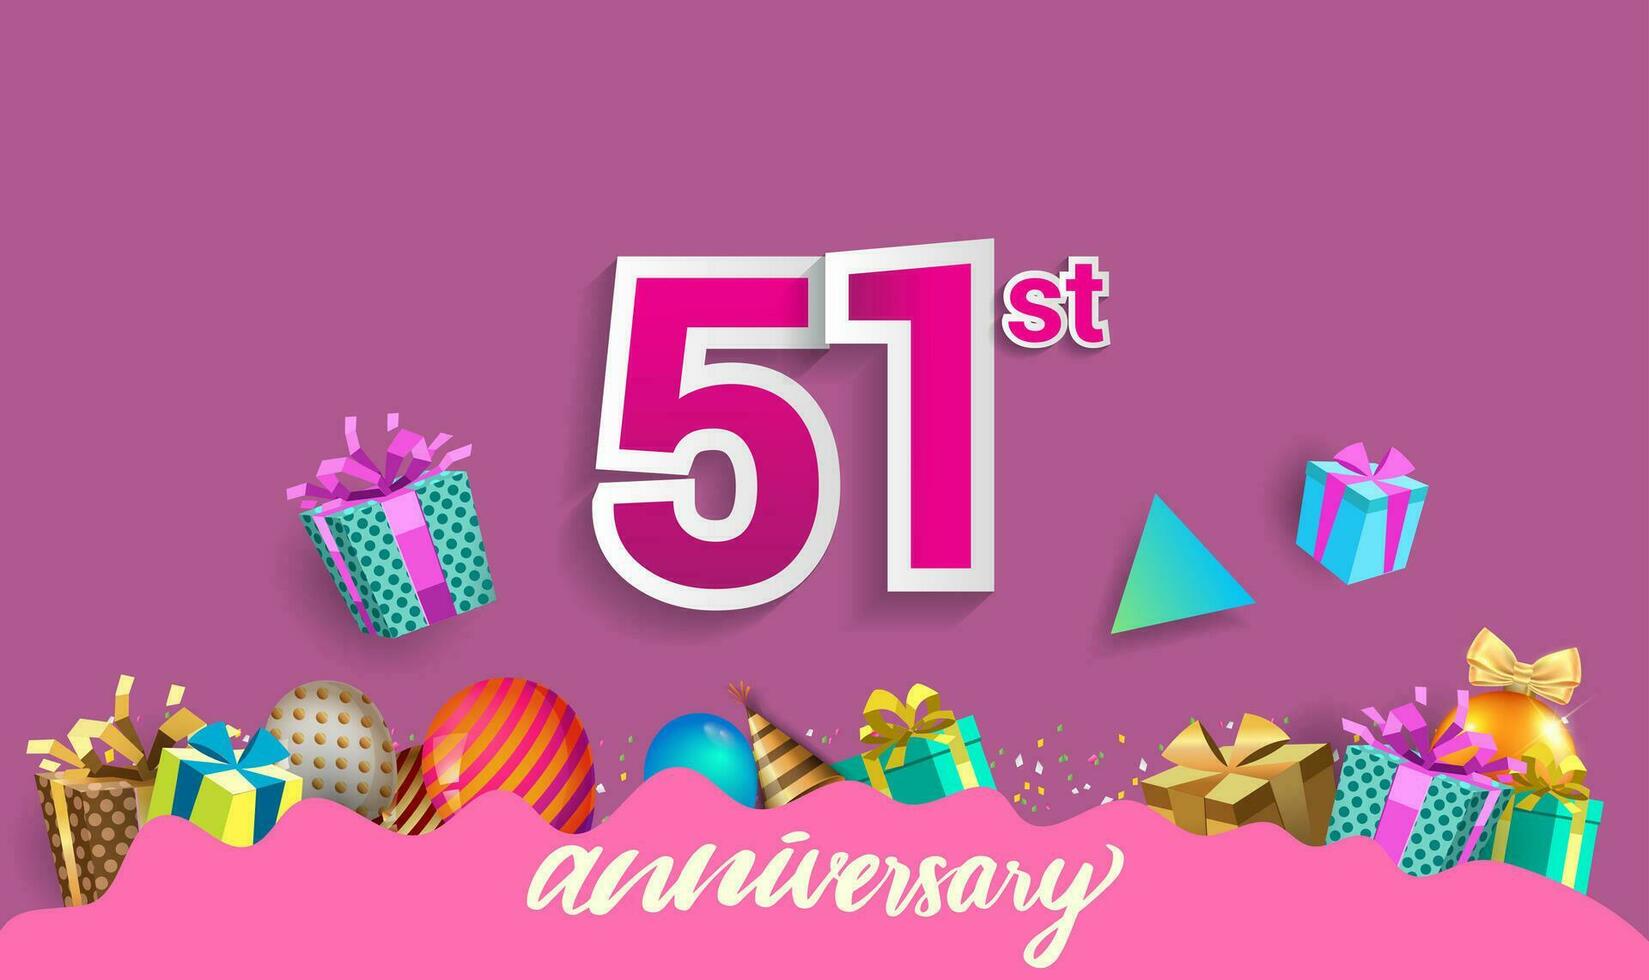 51st Years Anniversary Celebration Design, with gift box and balloons, ribbon, Colorful Vector template elements for your birthday celebrating party.